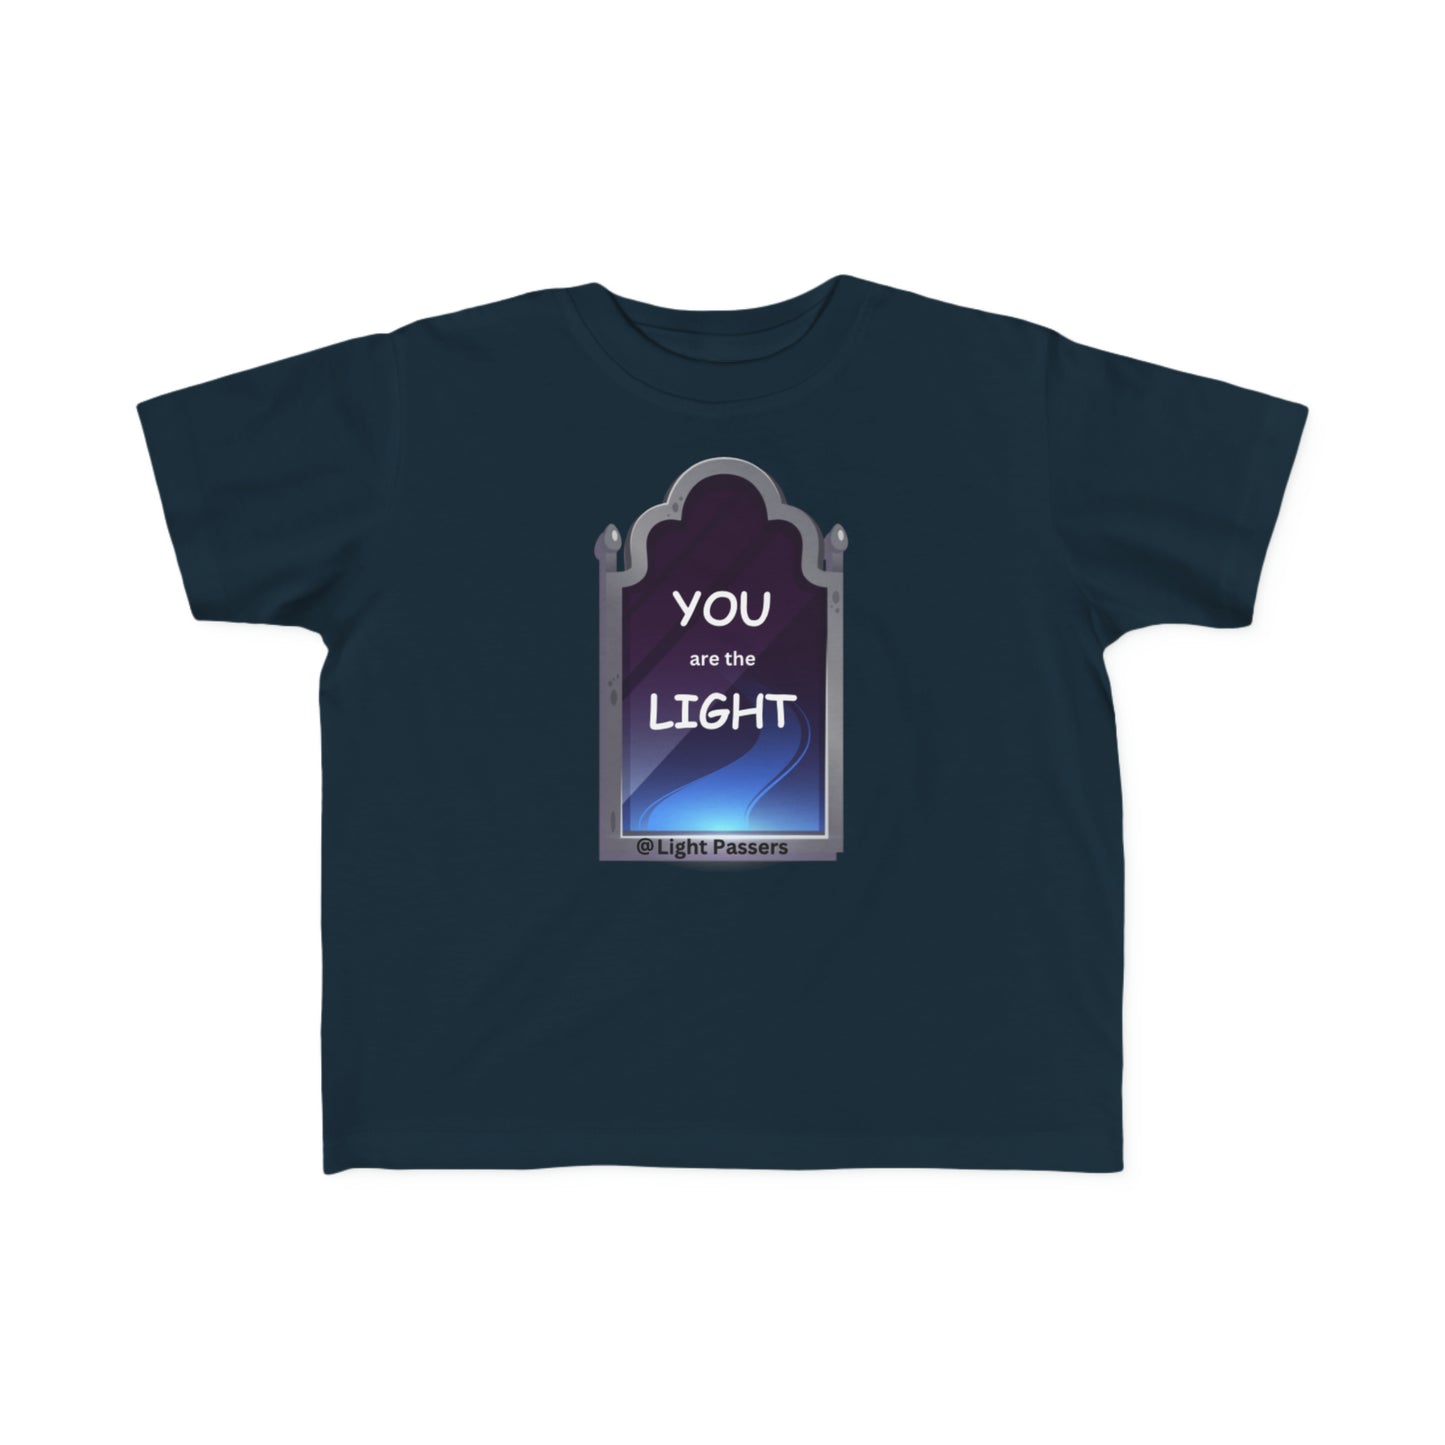 Light Passers Marketplace T shirt You are the Light mirror Toddler T-shirt Simple Messages, Mental Health, Inspirational Messages